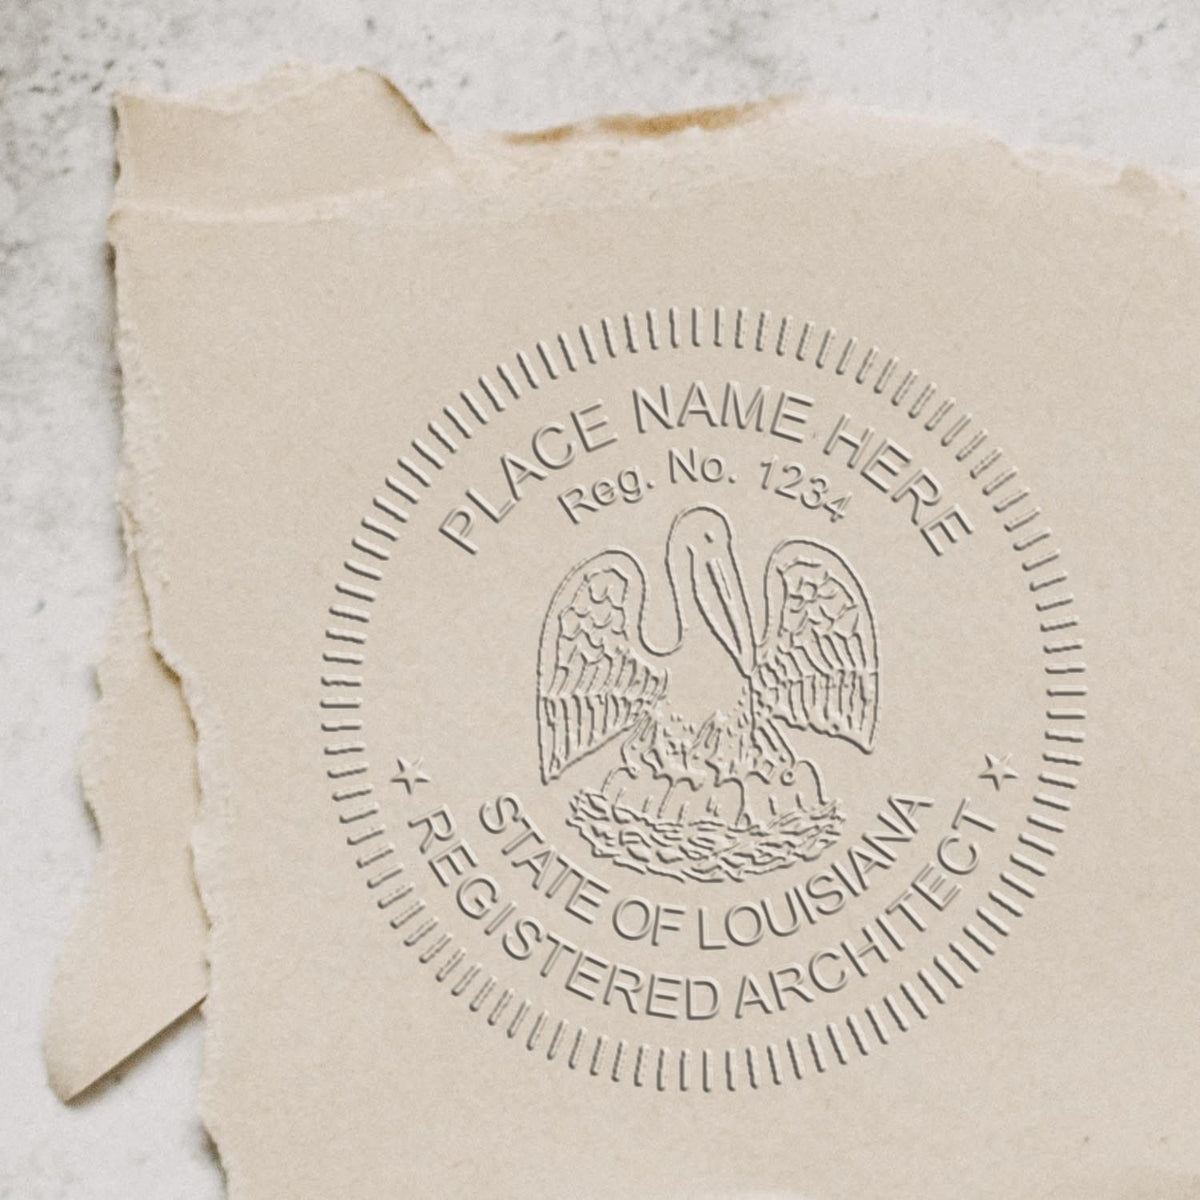 This paper is stamped with a sample imprint of the Extended Long Reach Louisiana Architect Seal Embosser, signifying its quality and reliability.